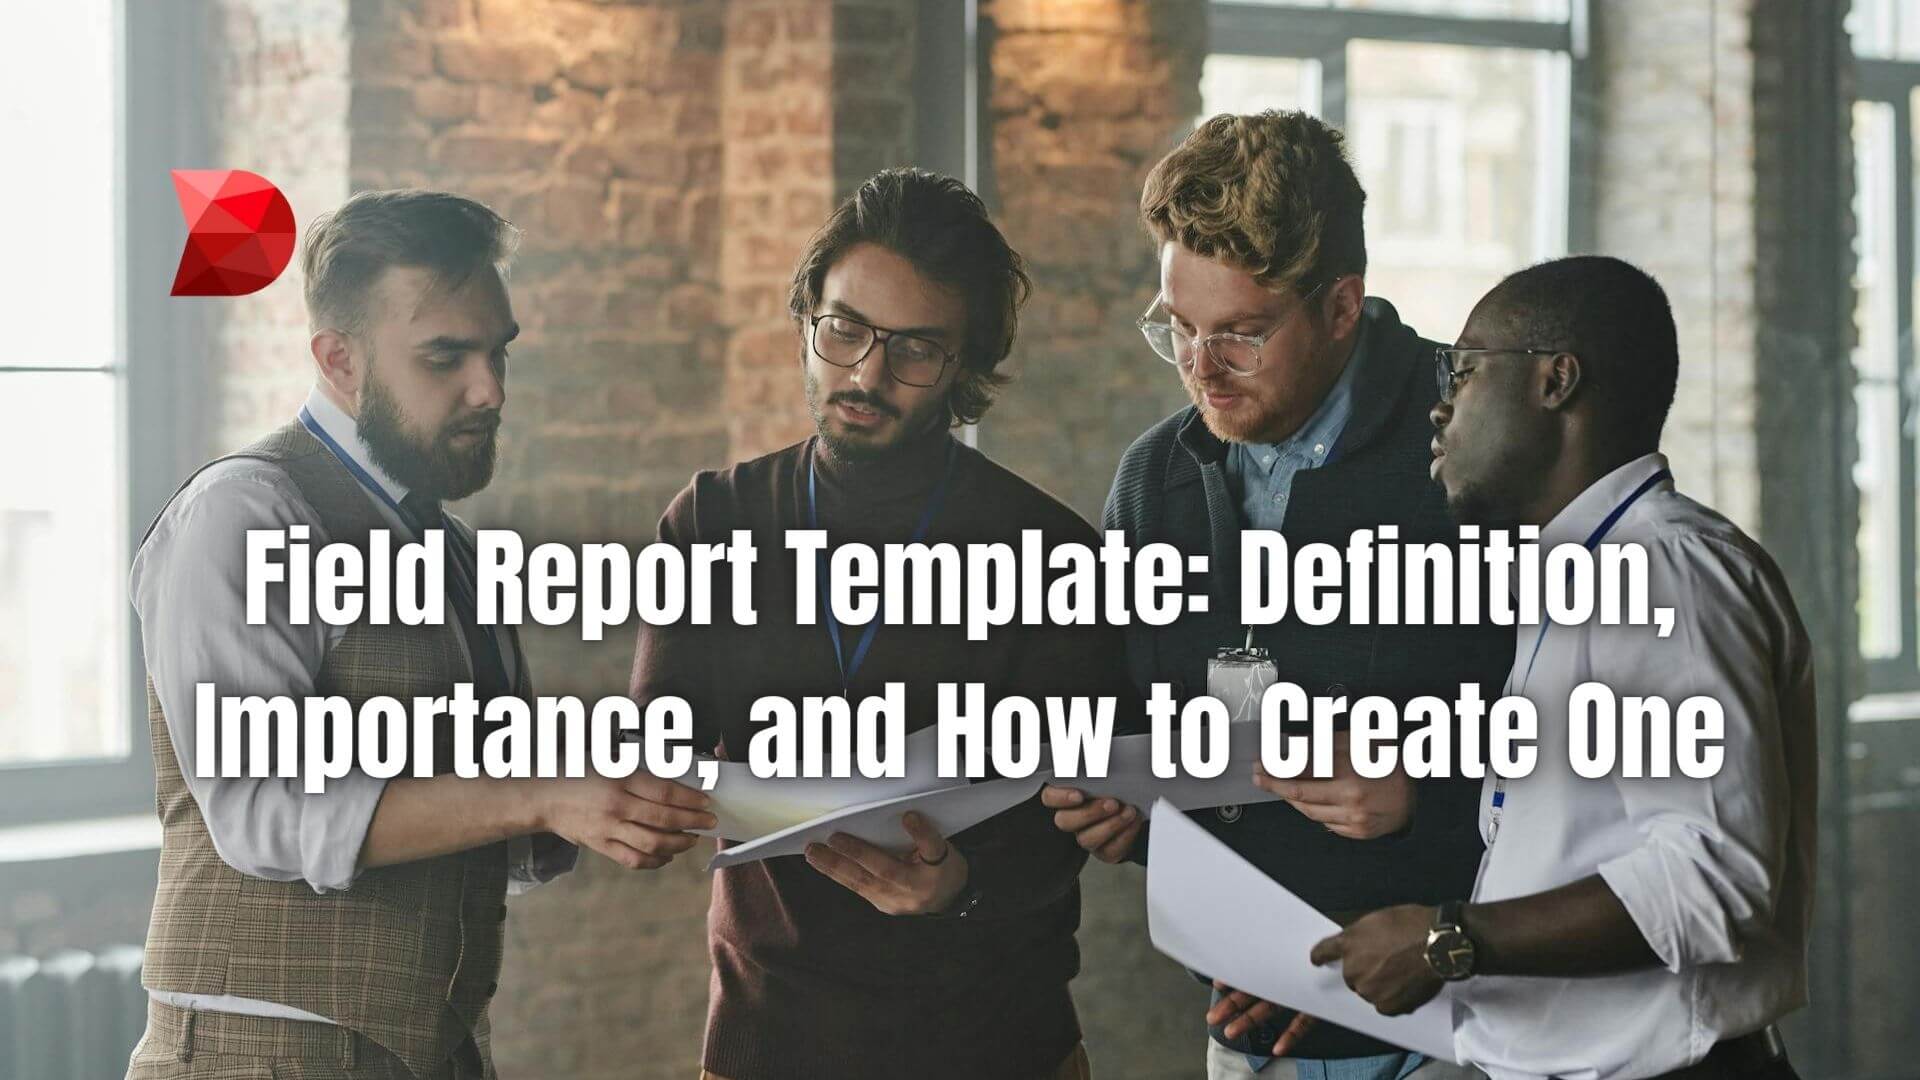 Transform your field reporting with our step-by-step guide. Click here to learn how to create templates that capture data effectively.